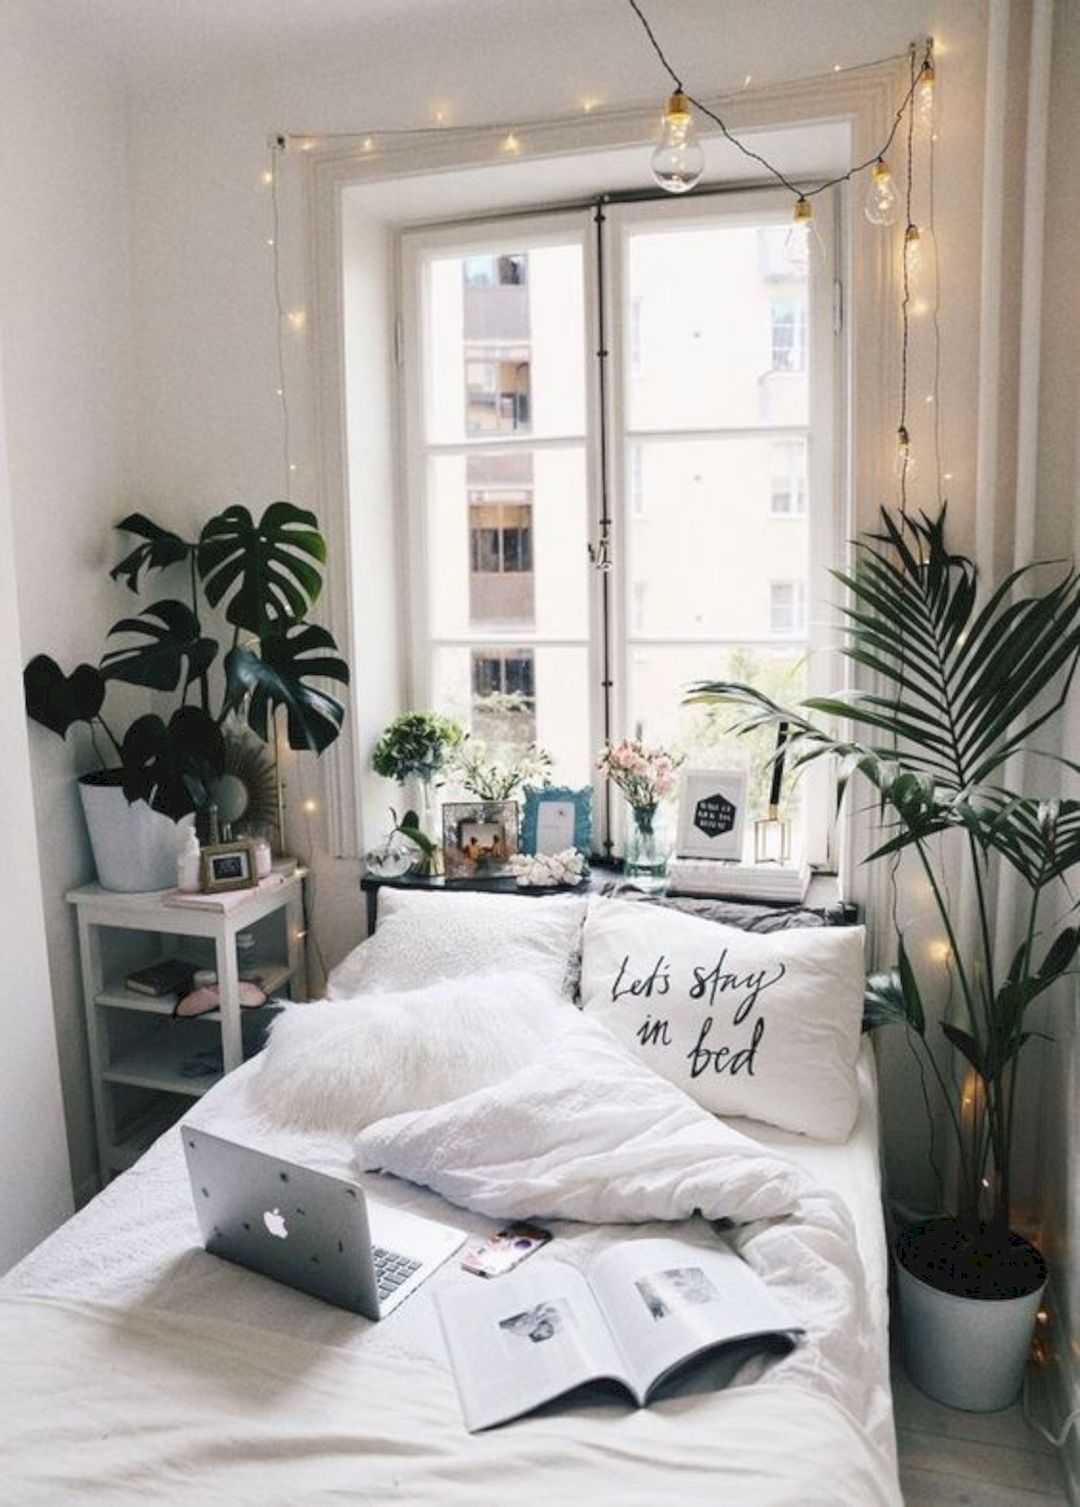 15 Fascinating Bedrooms With Plants That Look Like A Jungle